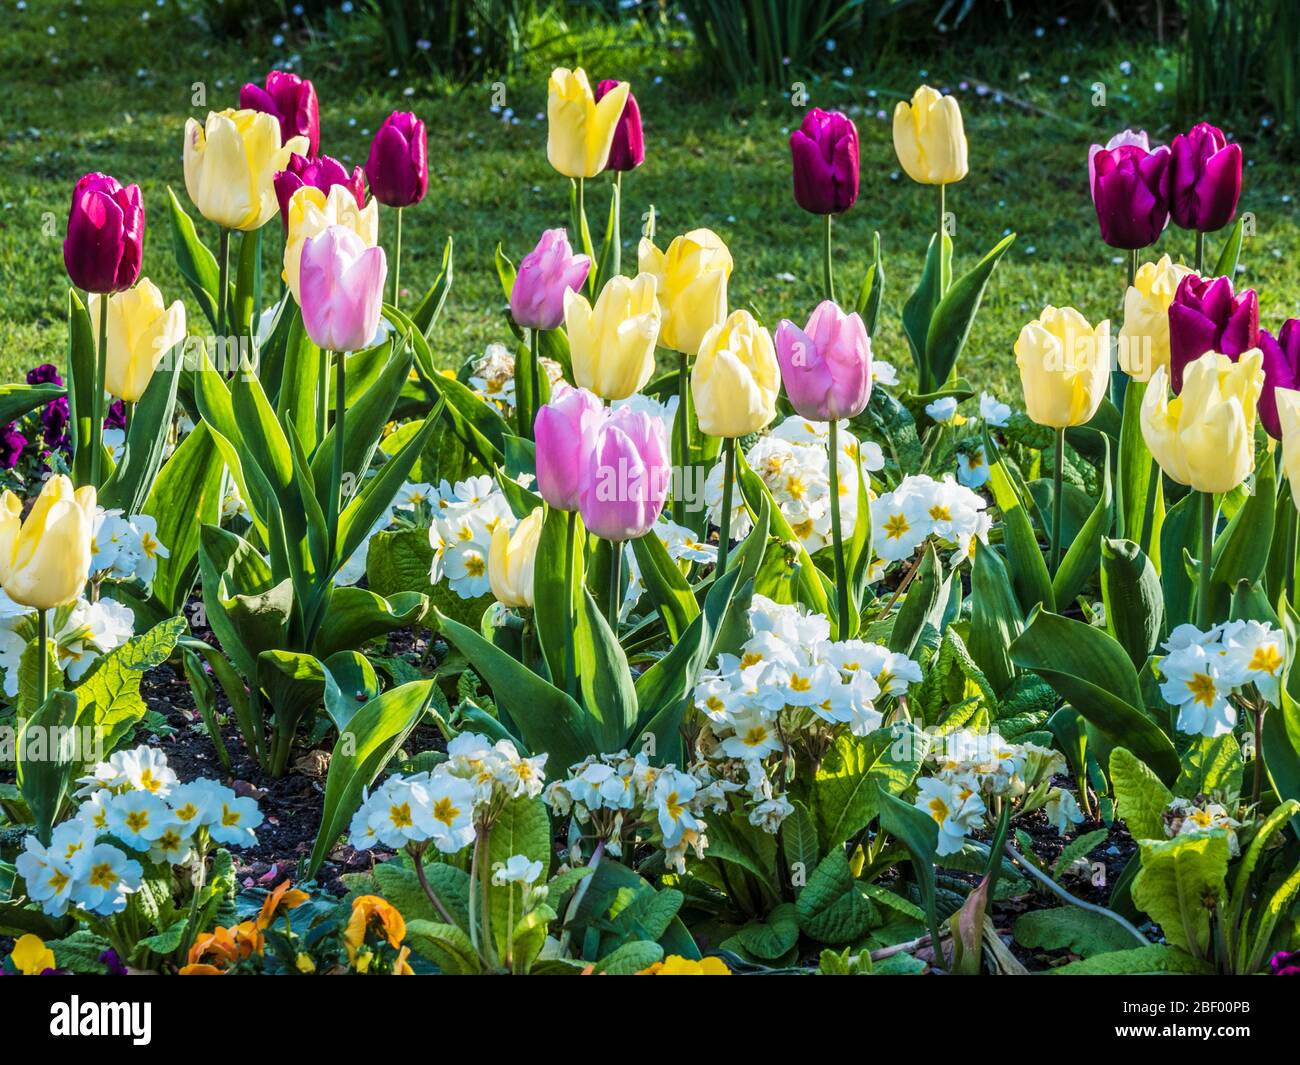 Yellow, pink and purple tulips in a bed of white Polyanthus or Primulas. Stock Photo